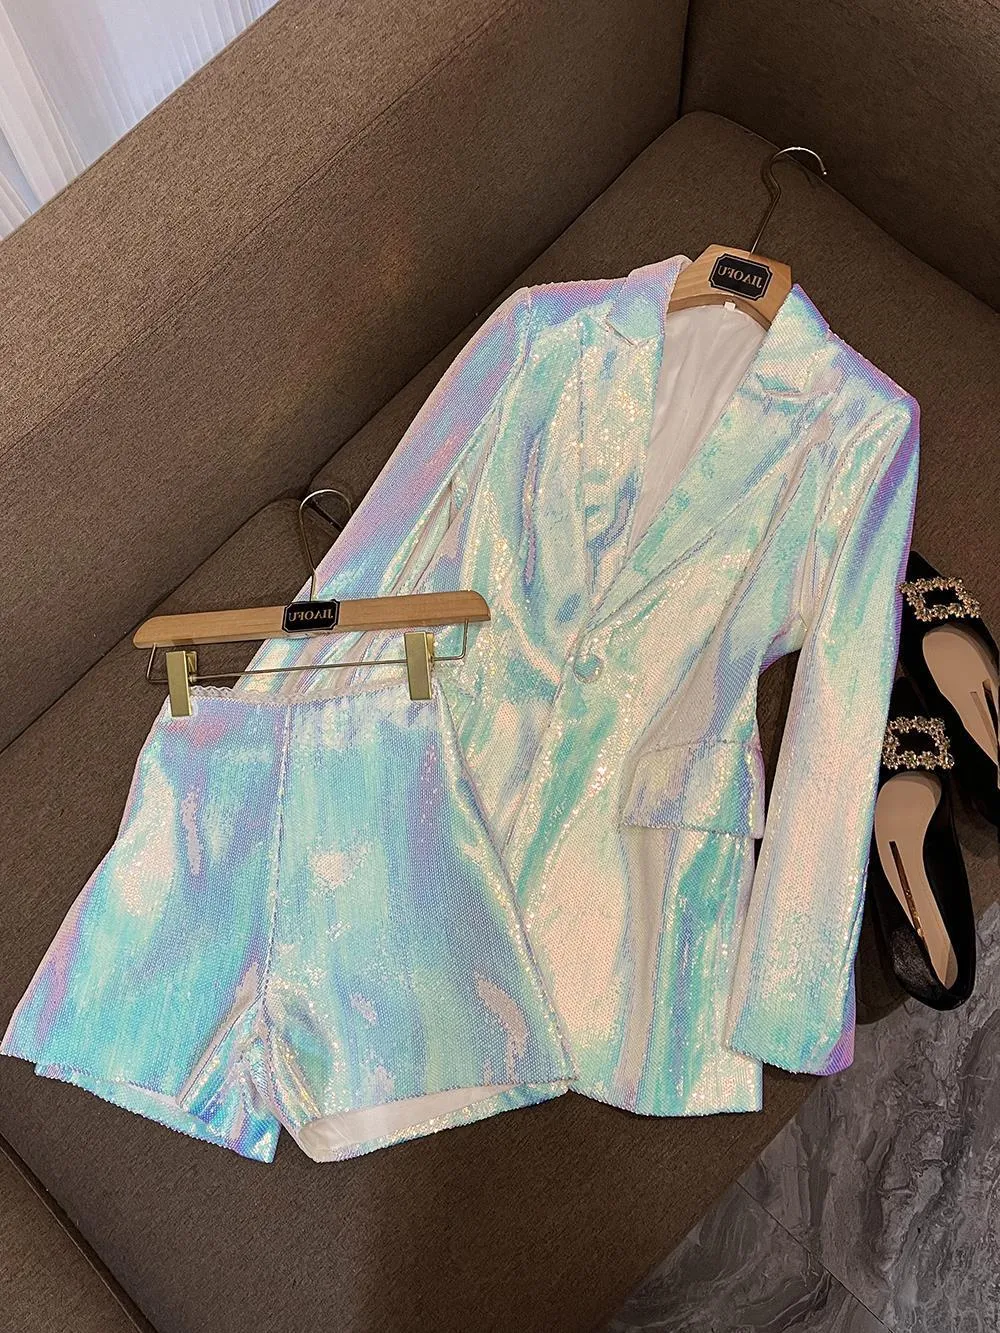 Women's Tracksuits Brand Sequins Cloth For Women Long Sleeve Single Button Casual Shorts Suit Lady Fashion 2Pcs 230208